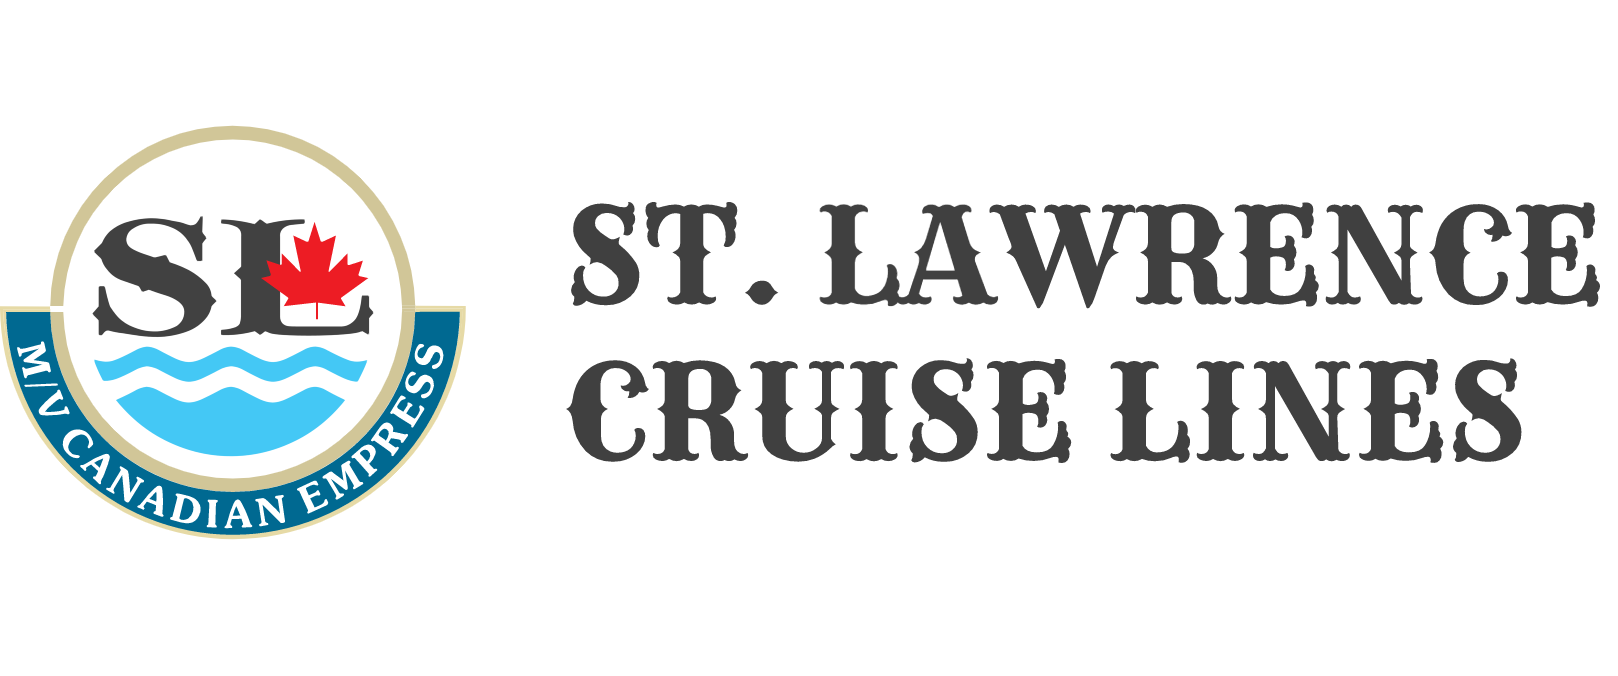 st lawrence seaway cruise line st lawrence cruise lines